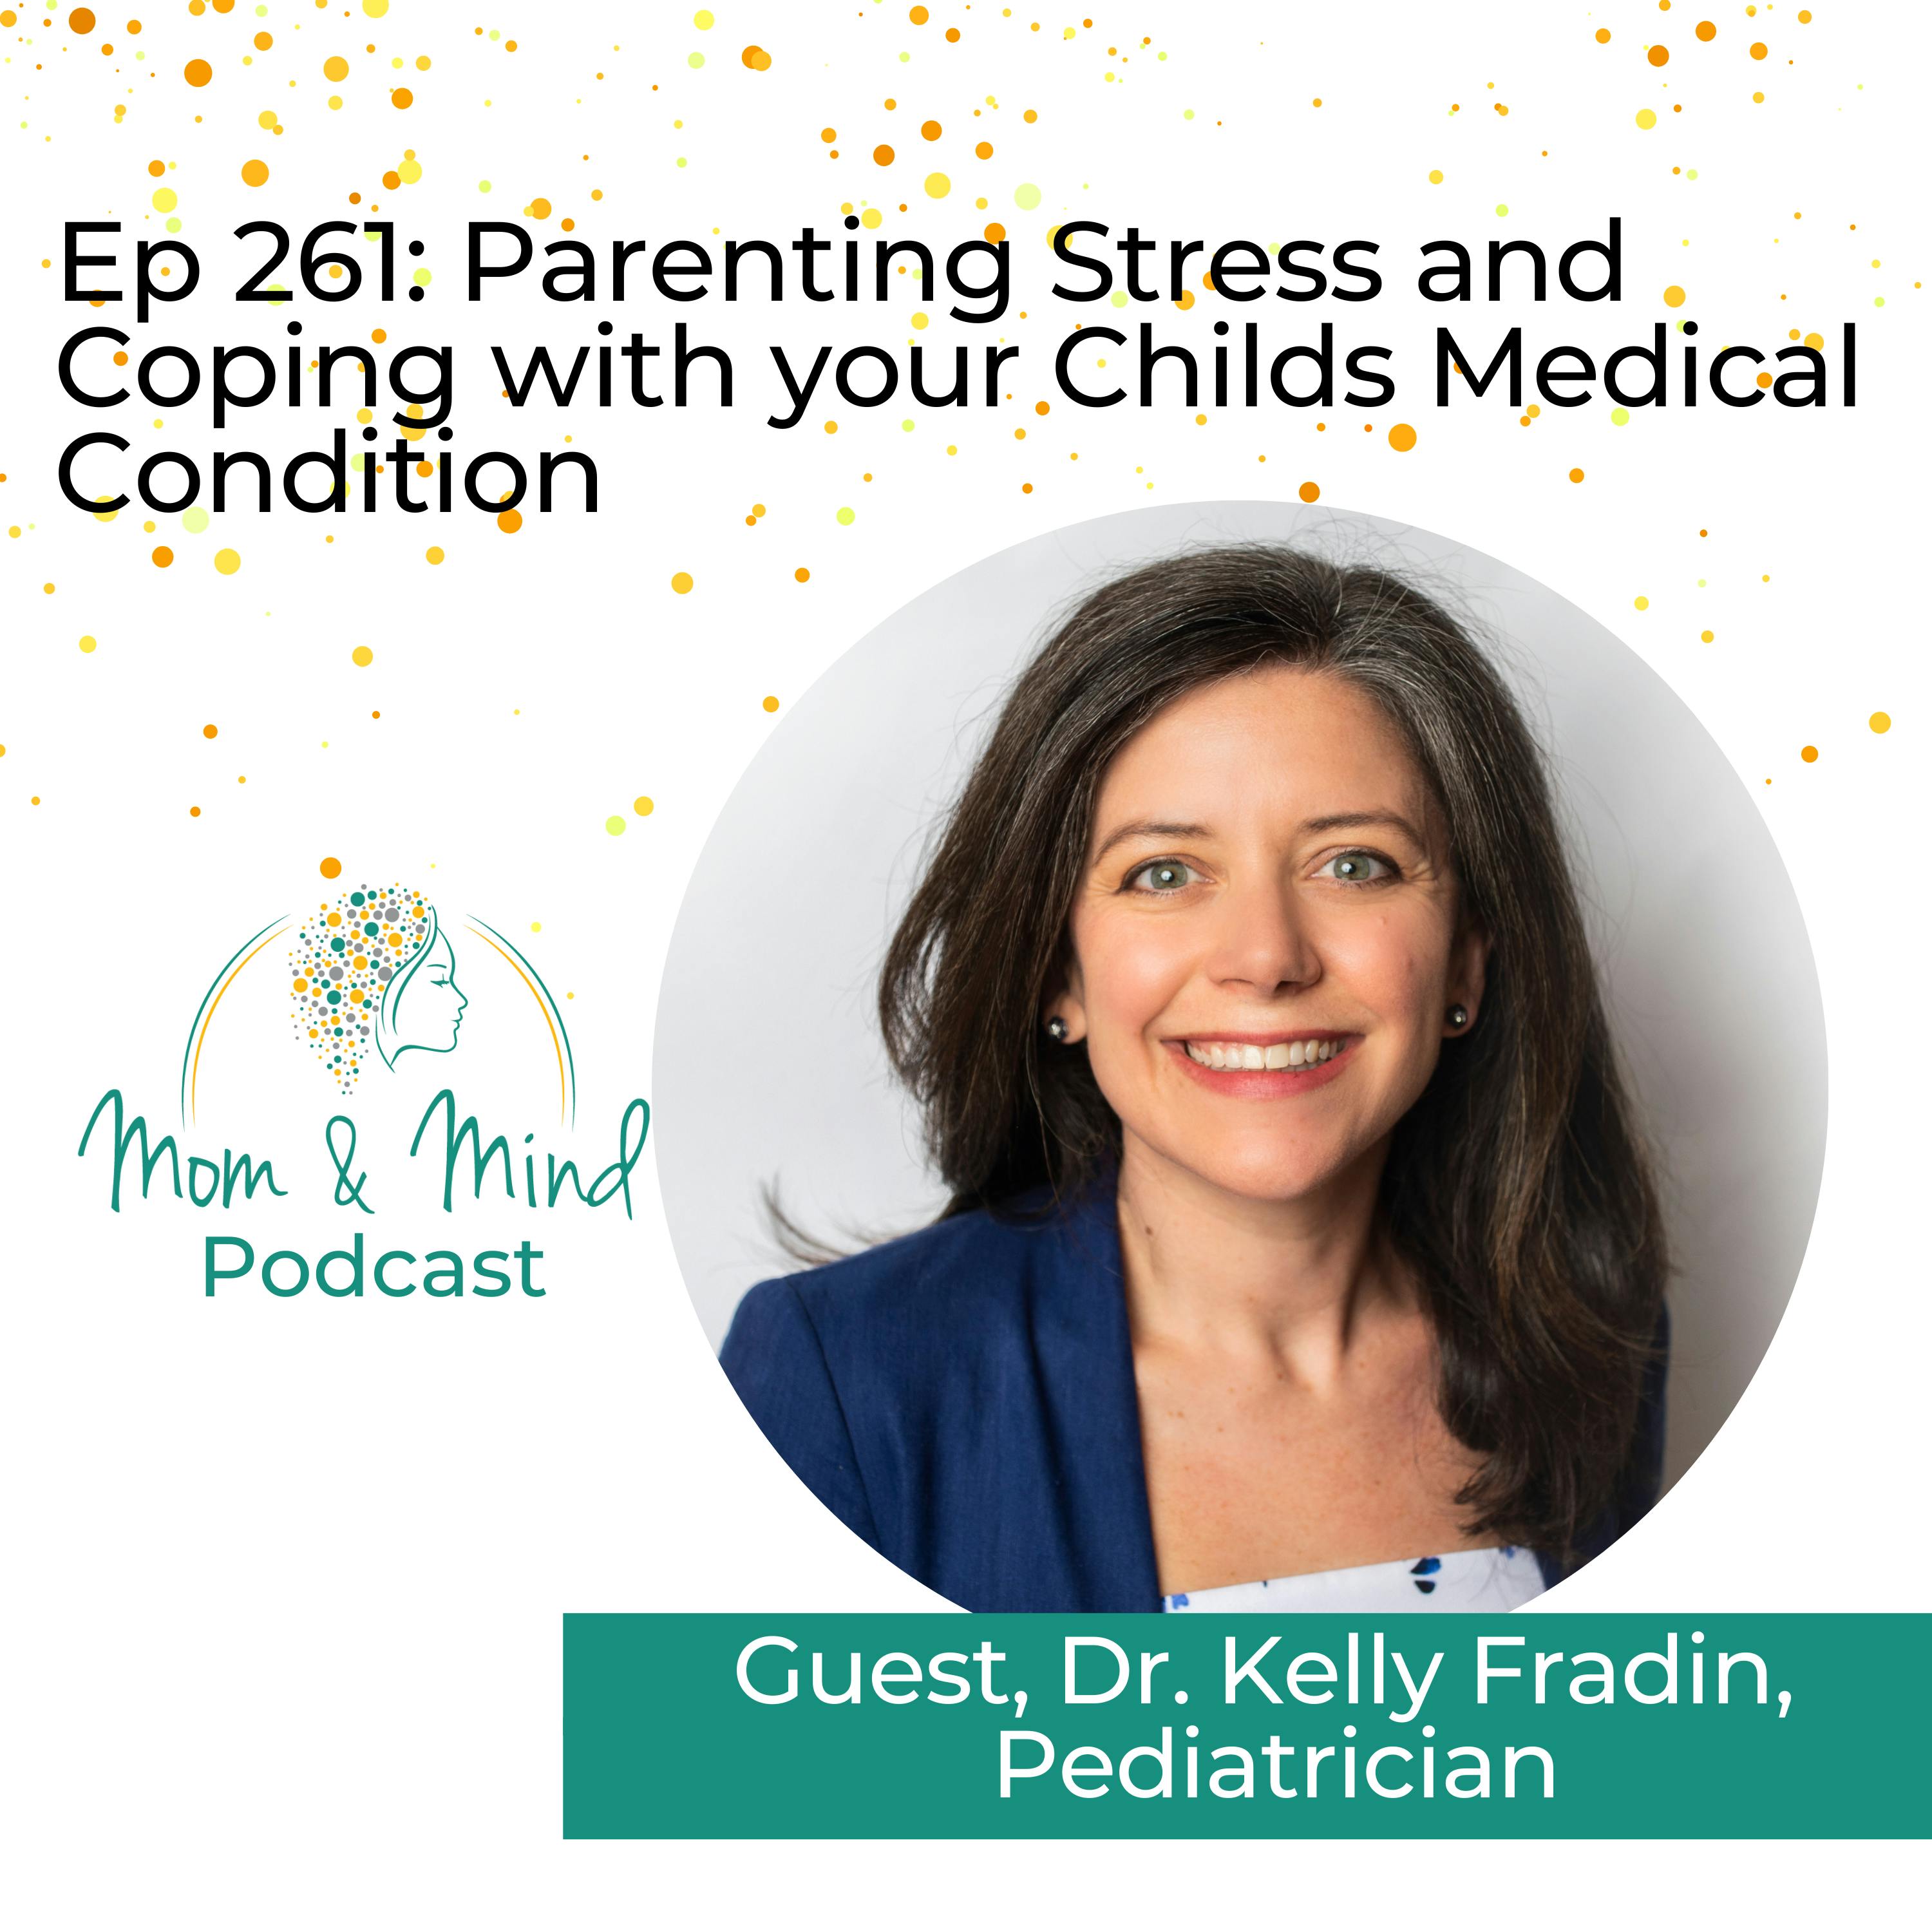 261: Parenting Stress and Coping with Your Child's Medical Condition